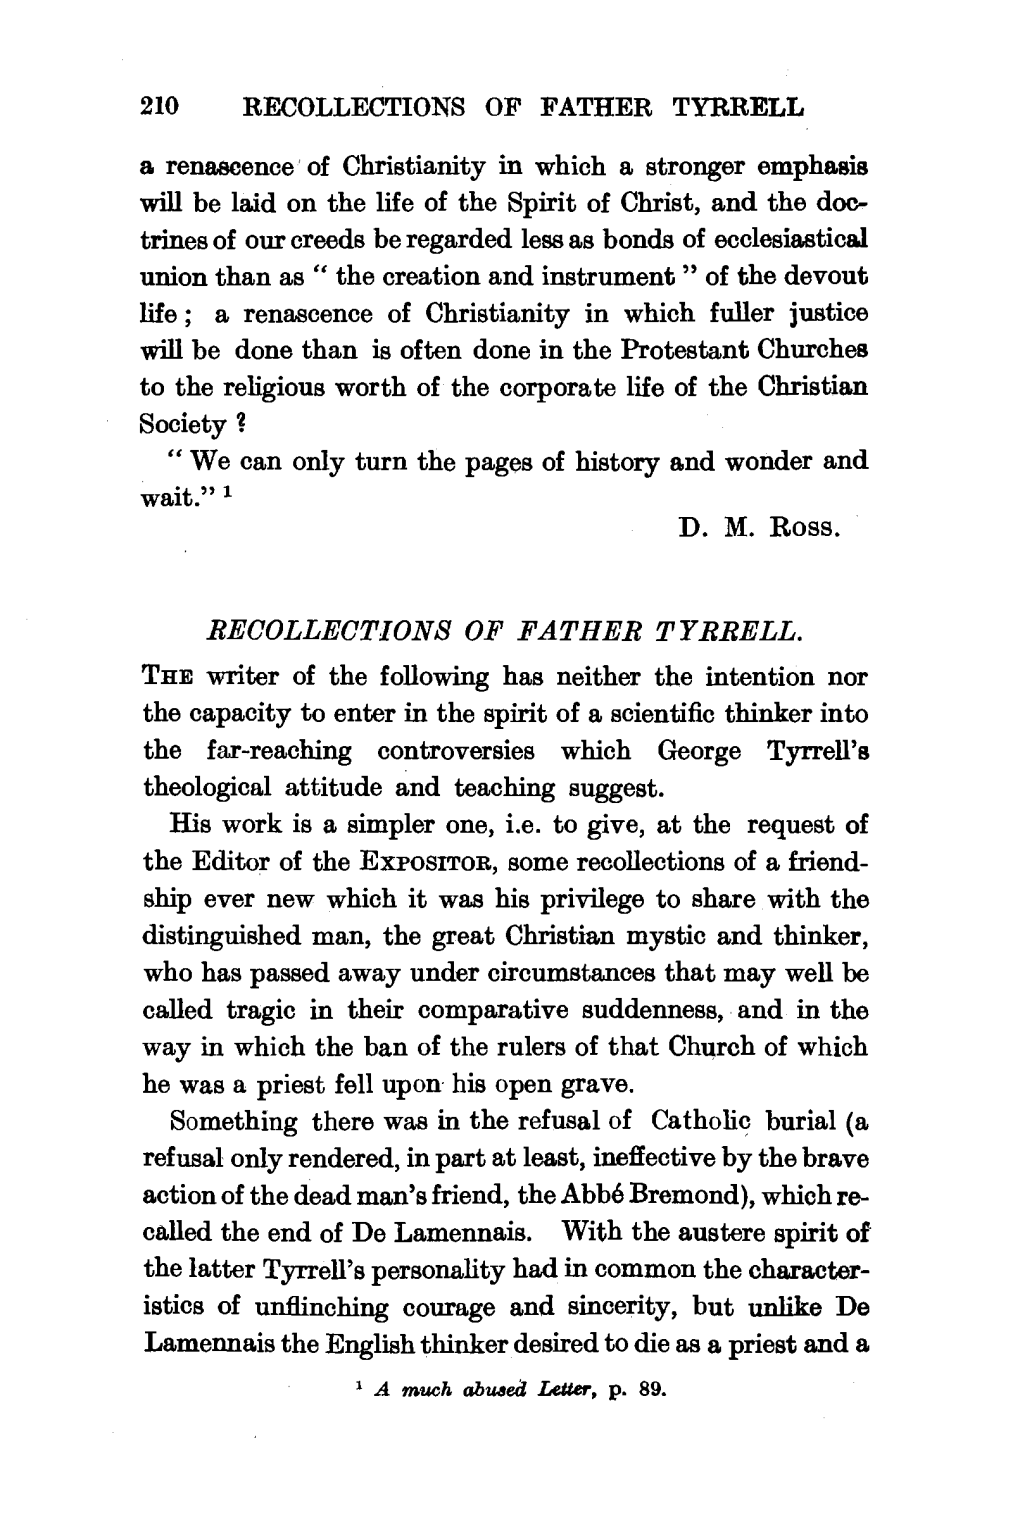 D. M. Ross. RECOLLECTIONS of FATHER TYRRELL